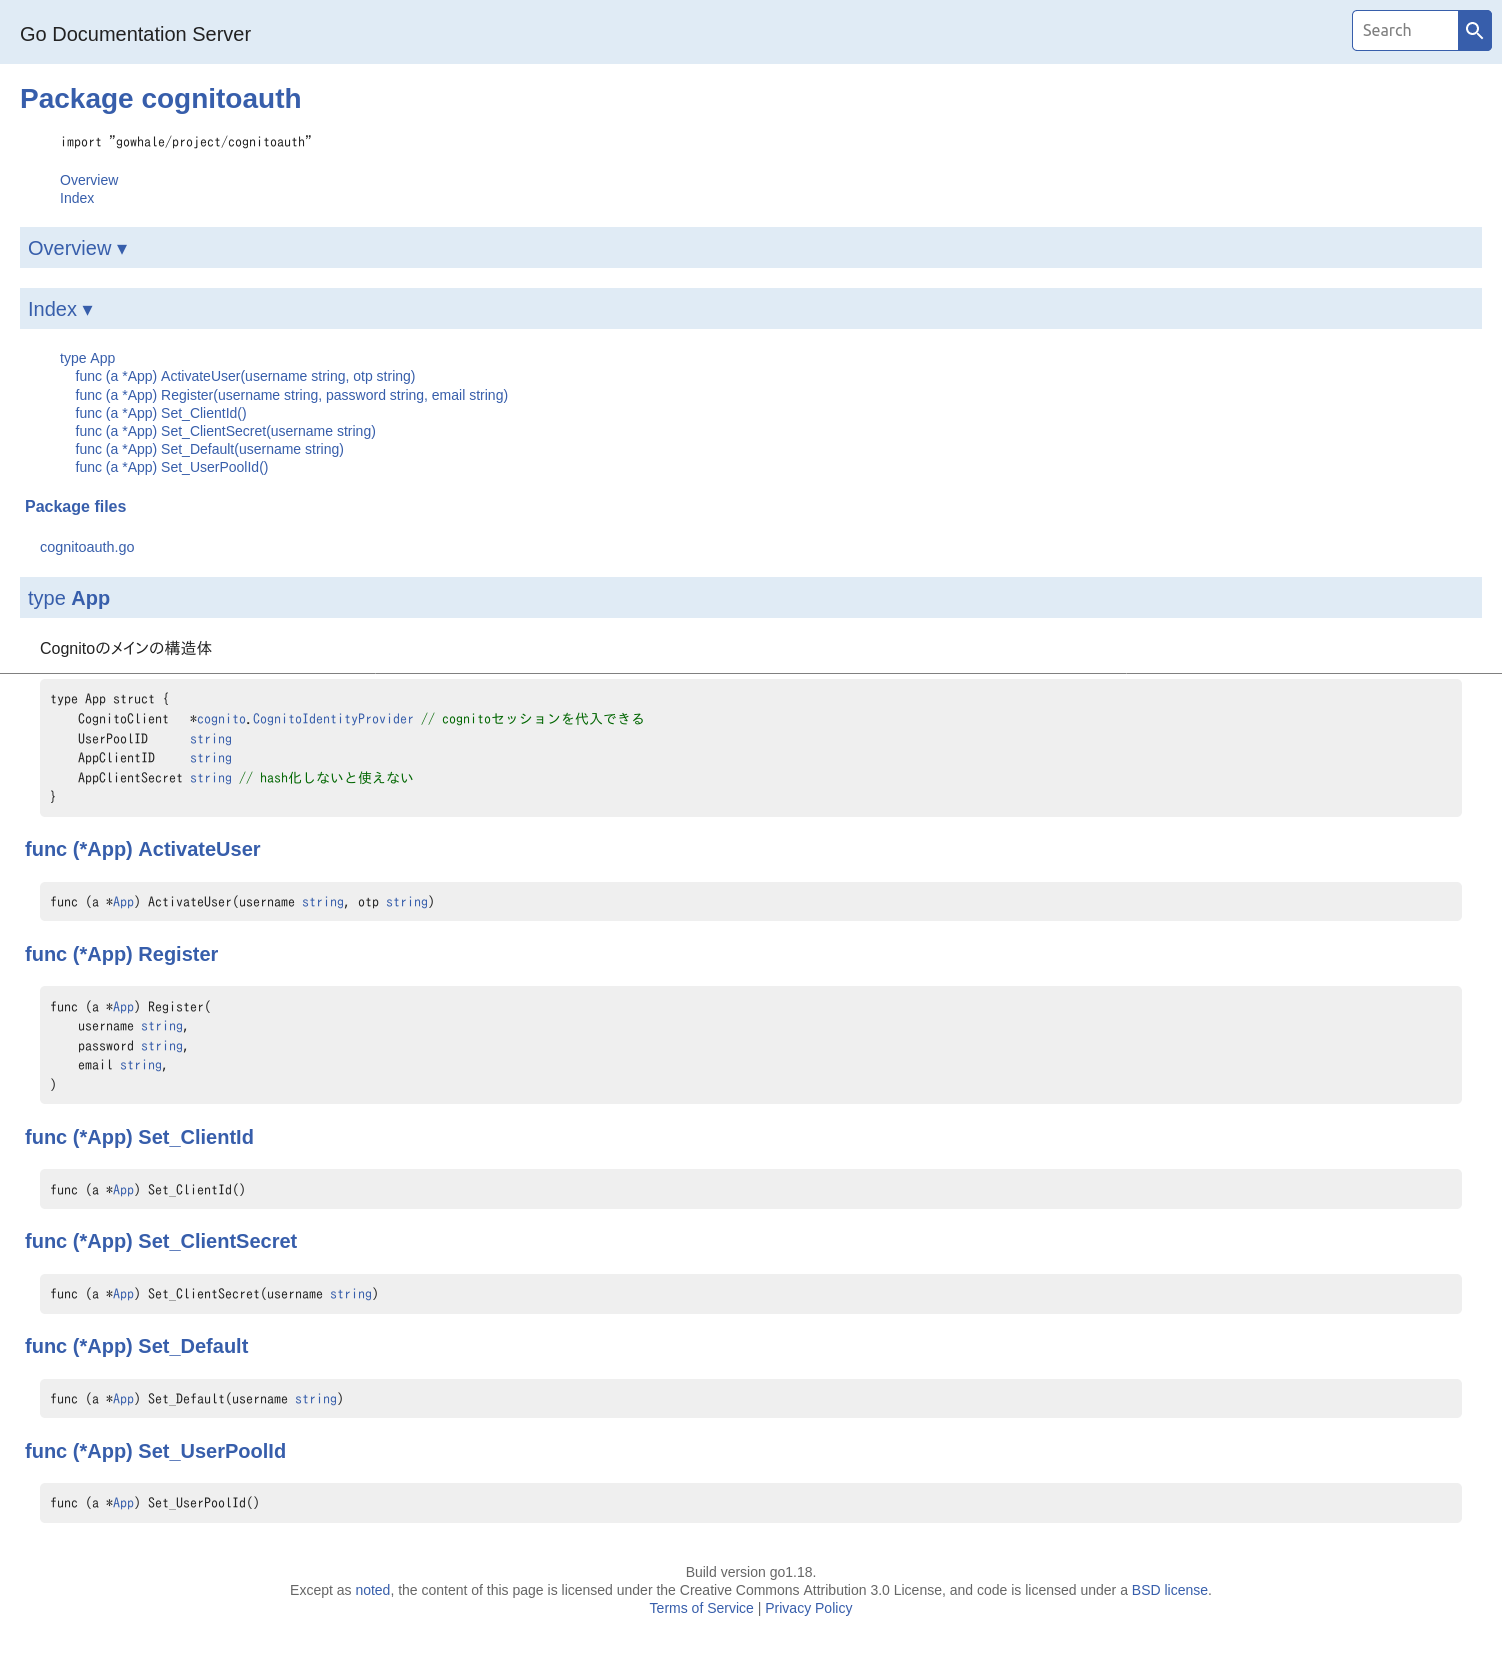 Screenshot 2022-11-29 at 02-27-20 cognitoauth - Go Documentation Server.png